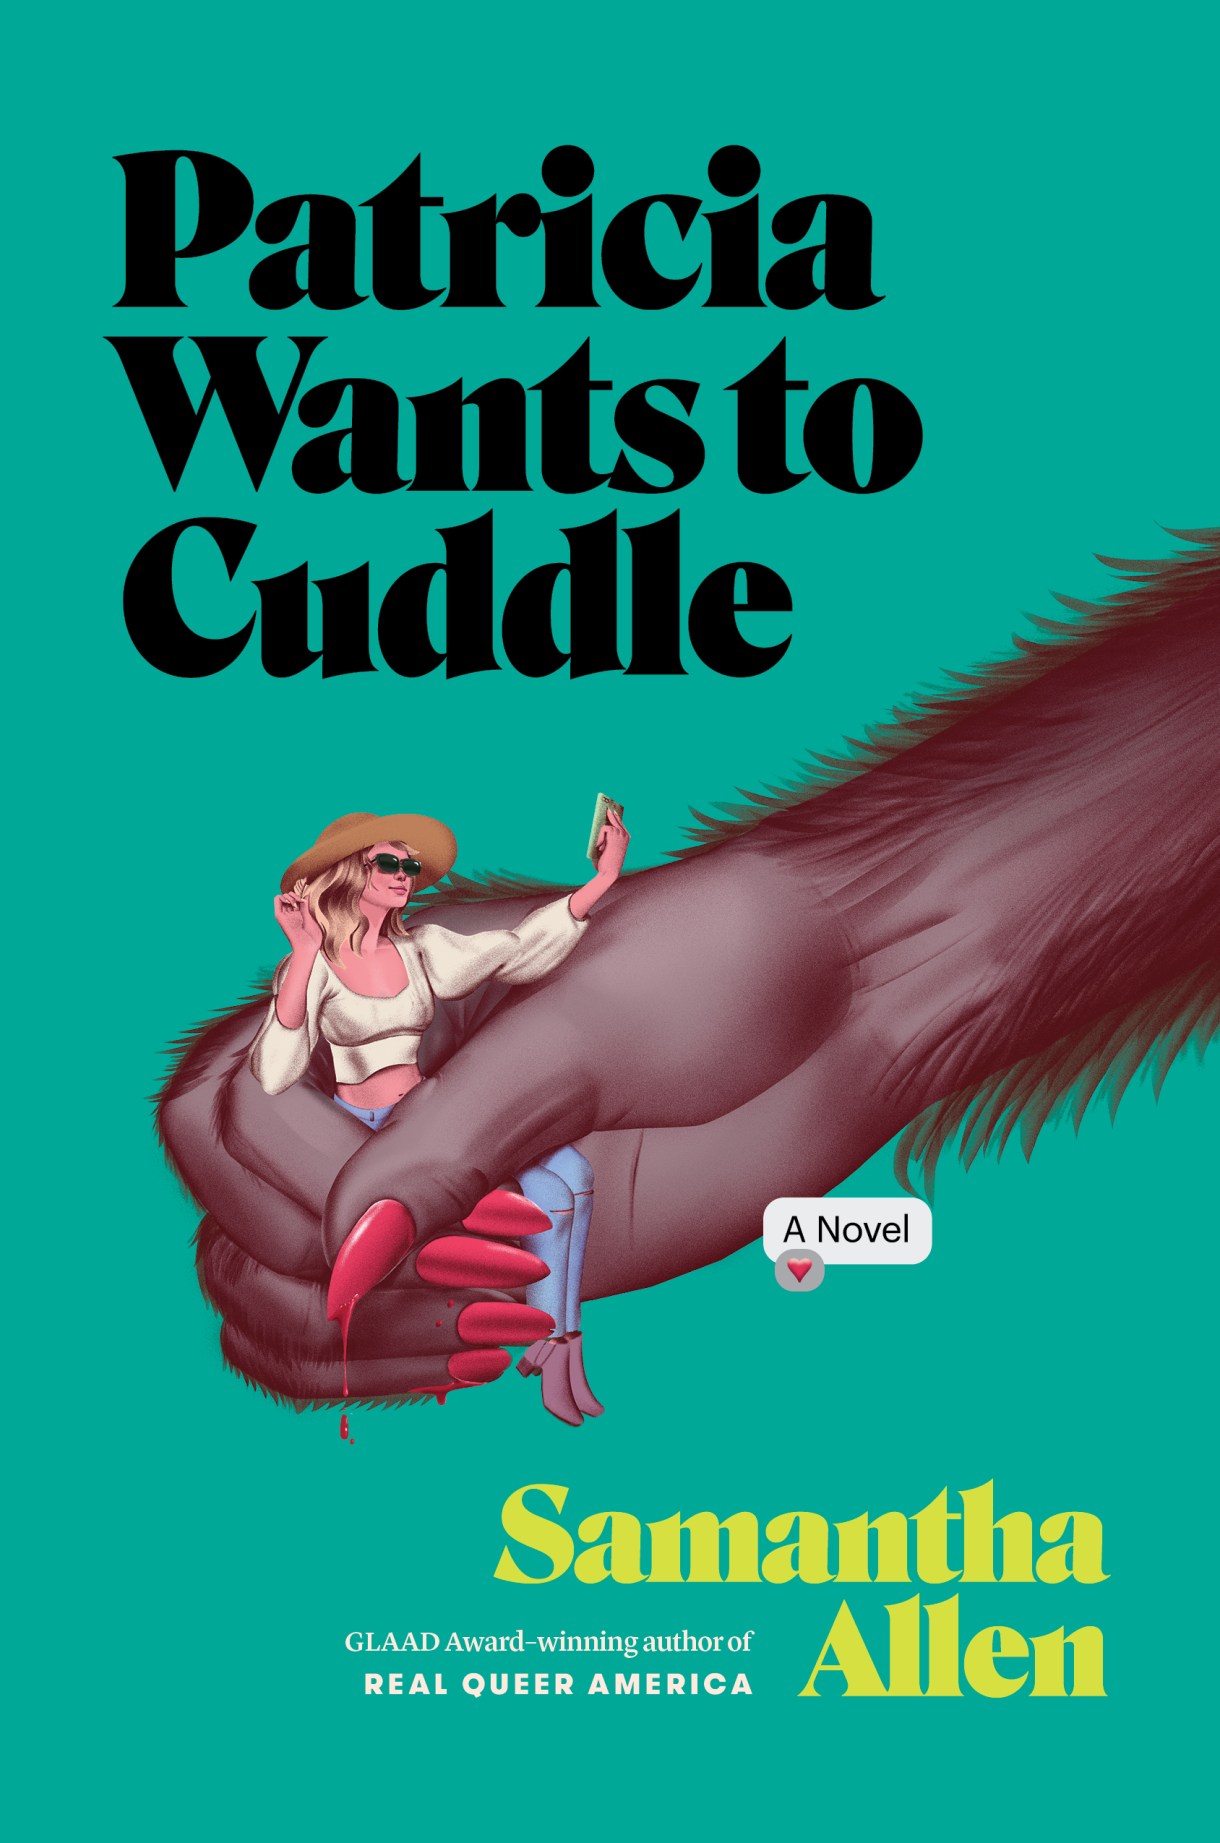 The cover of "Patricia Wants to Cuddle" featuring a hairy gorilla arm with painted red nails holding a white woman taking a selfie.